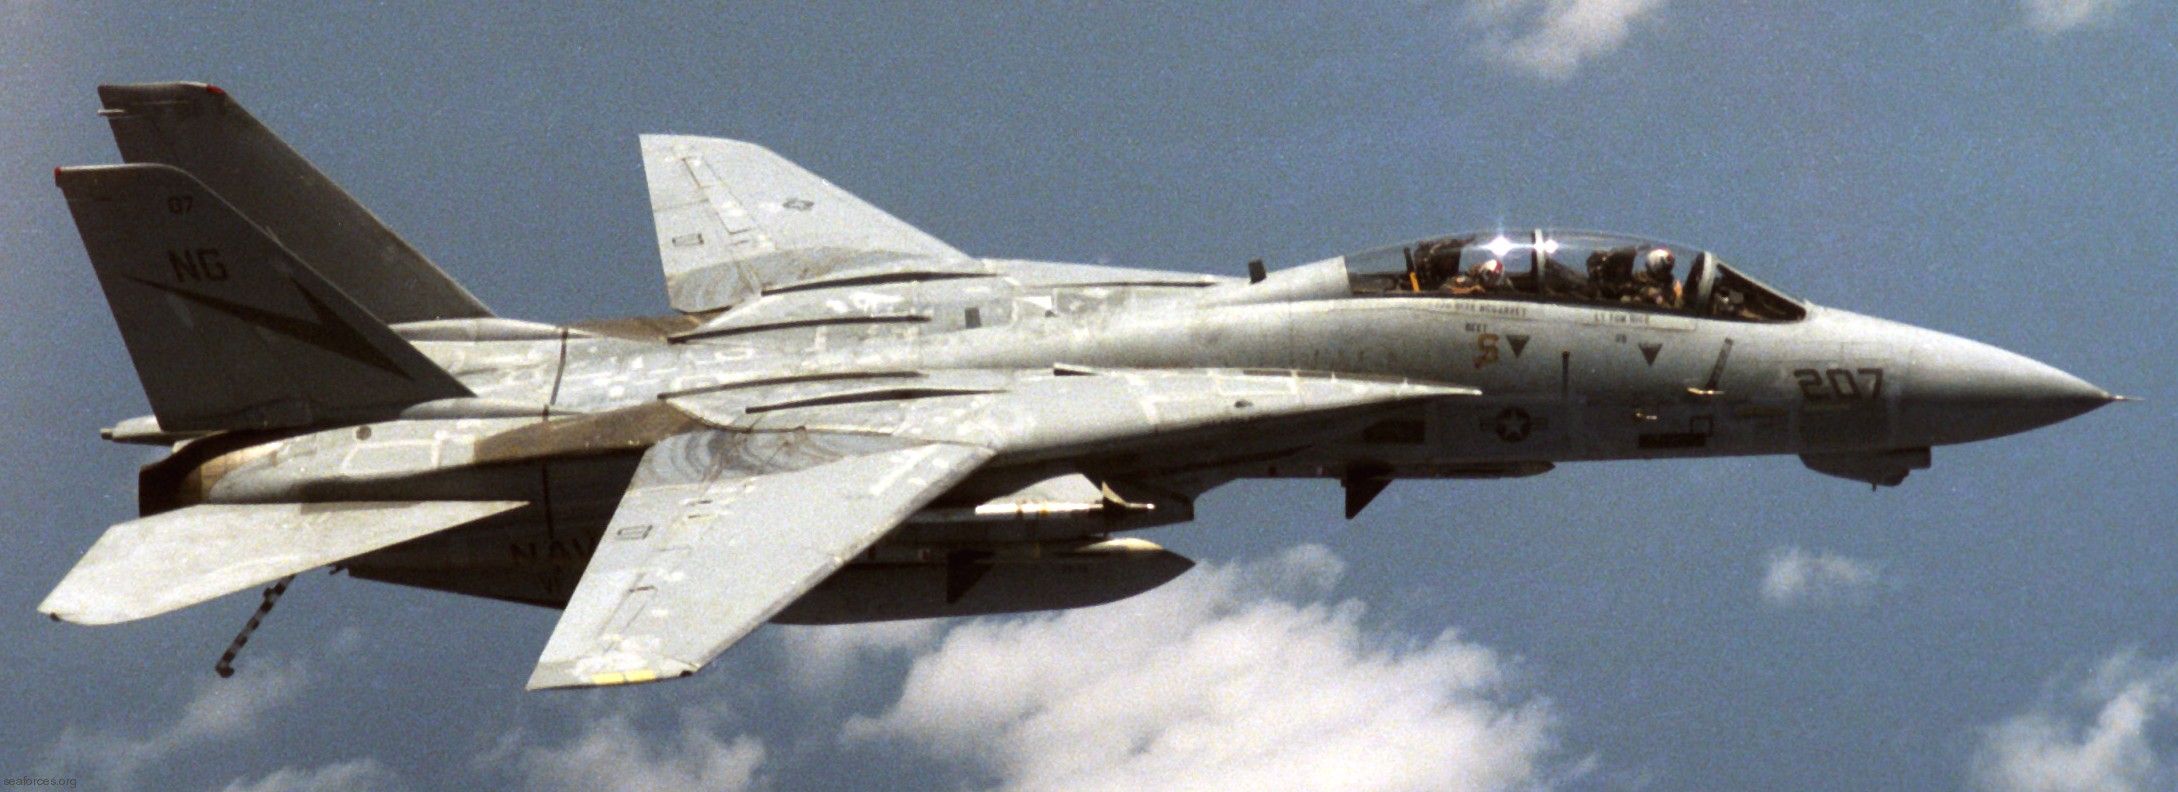 vf-24 fighting renegades fighter squadron navy f-14a tomcat carrier air wing cvw-9 uss kitty hawk cv-63 22